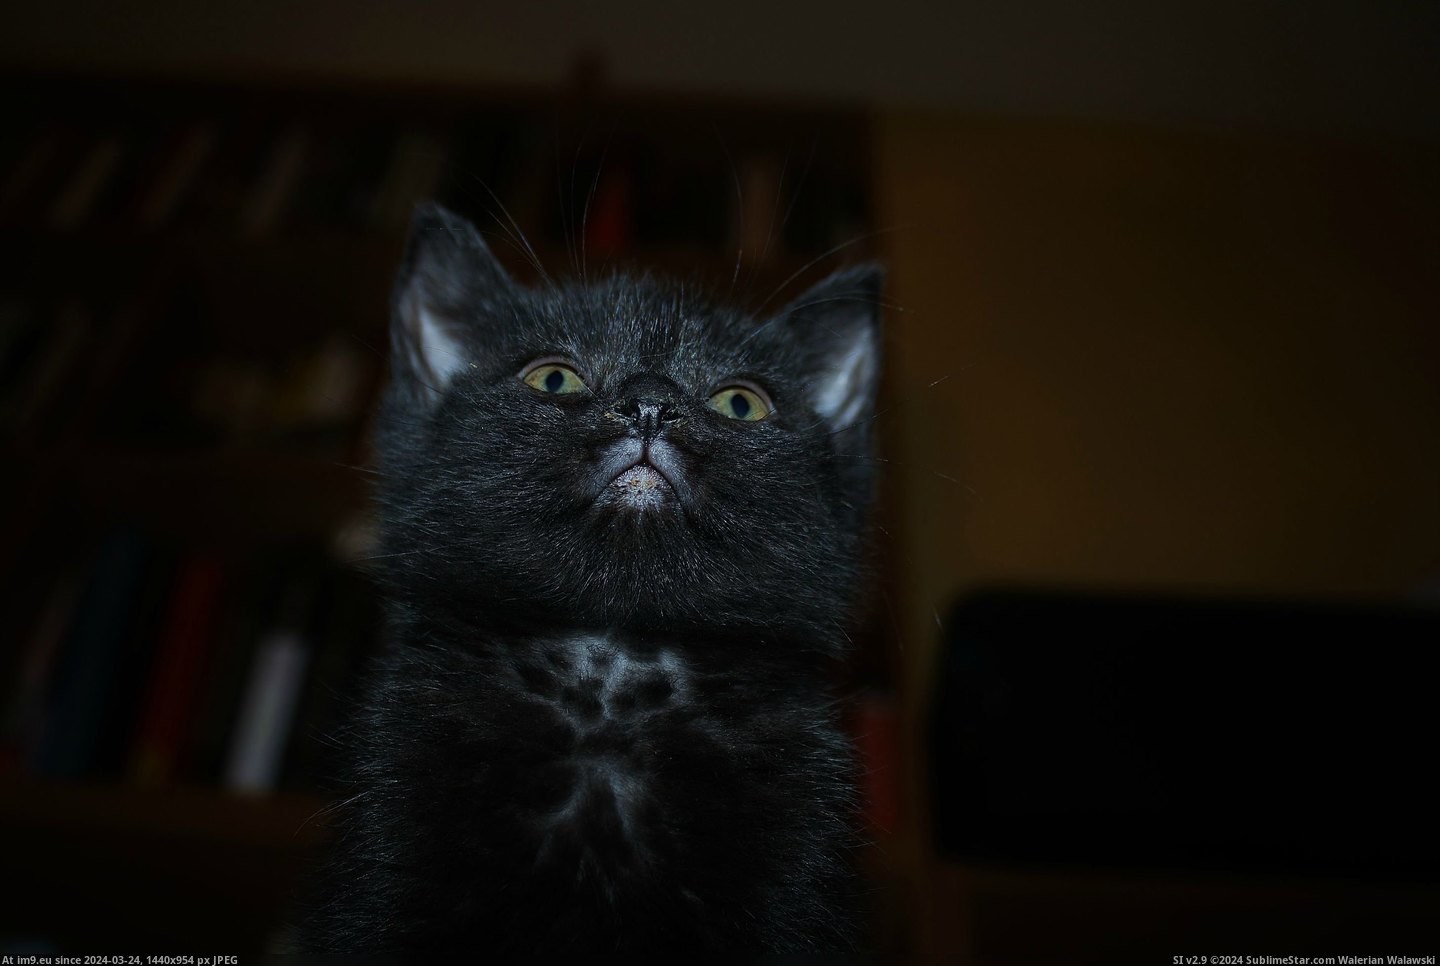 #Cats #Cute #Adopt #Fledgling #Supervillain #Sweet #Portrait [Cats] Trying for a sweet, cute, 'adopt me' portrait. Instead, got 'fledgling supervillain.' Pic. (Изображение из альбом My r/CATS favs))